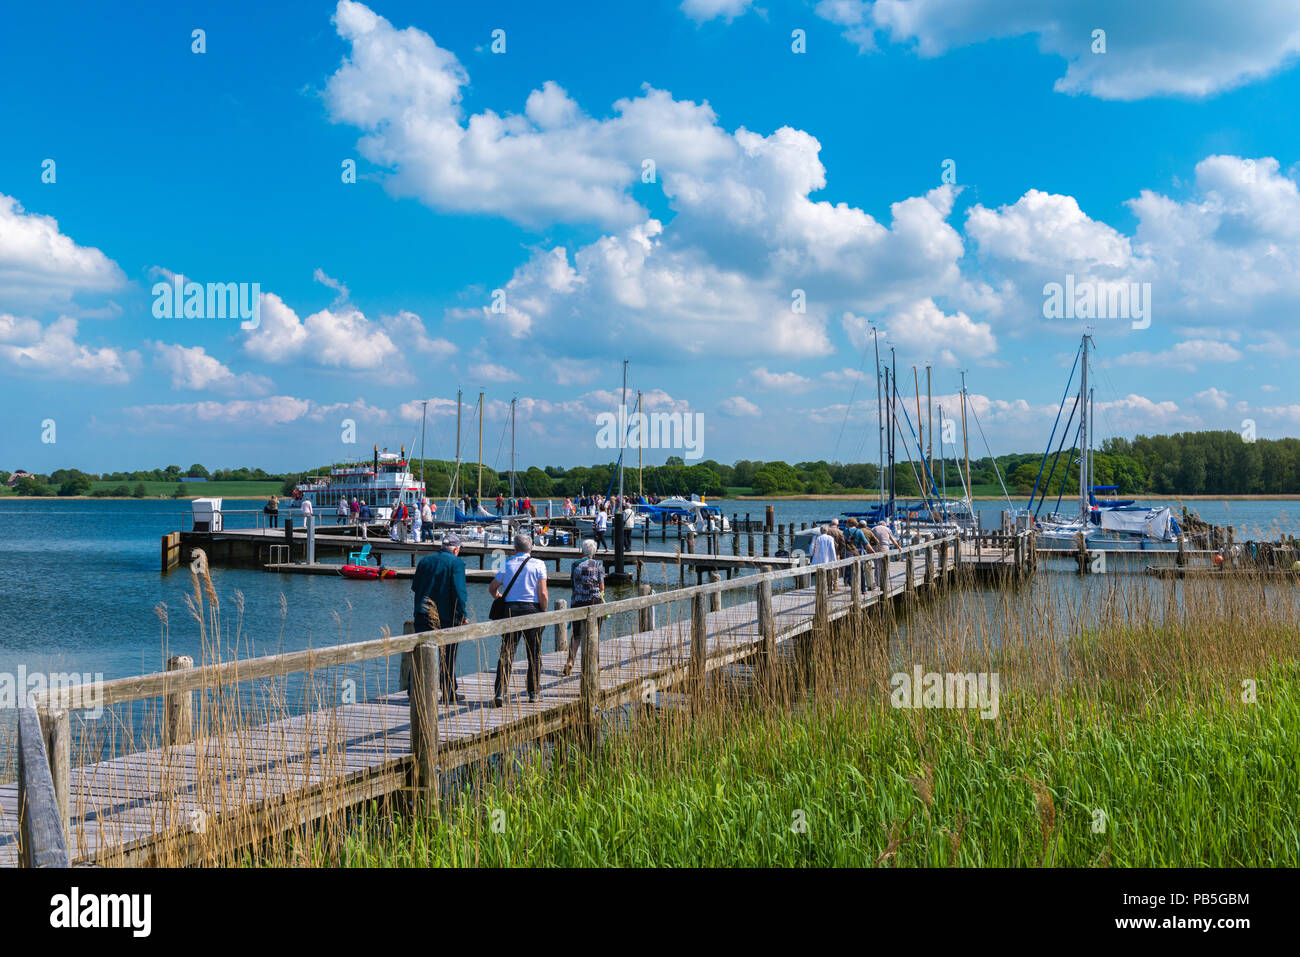 Excursion of elderly people with the  Schlei Princess, Schlei Fjord,  Lindaunis, landscape of Angeln, Schleswig-Holstein, Germany, Europe Stock Photo